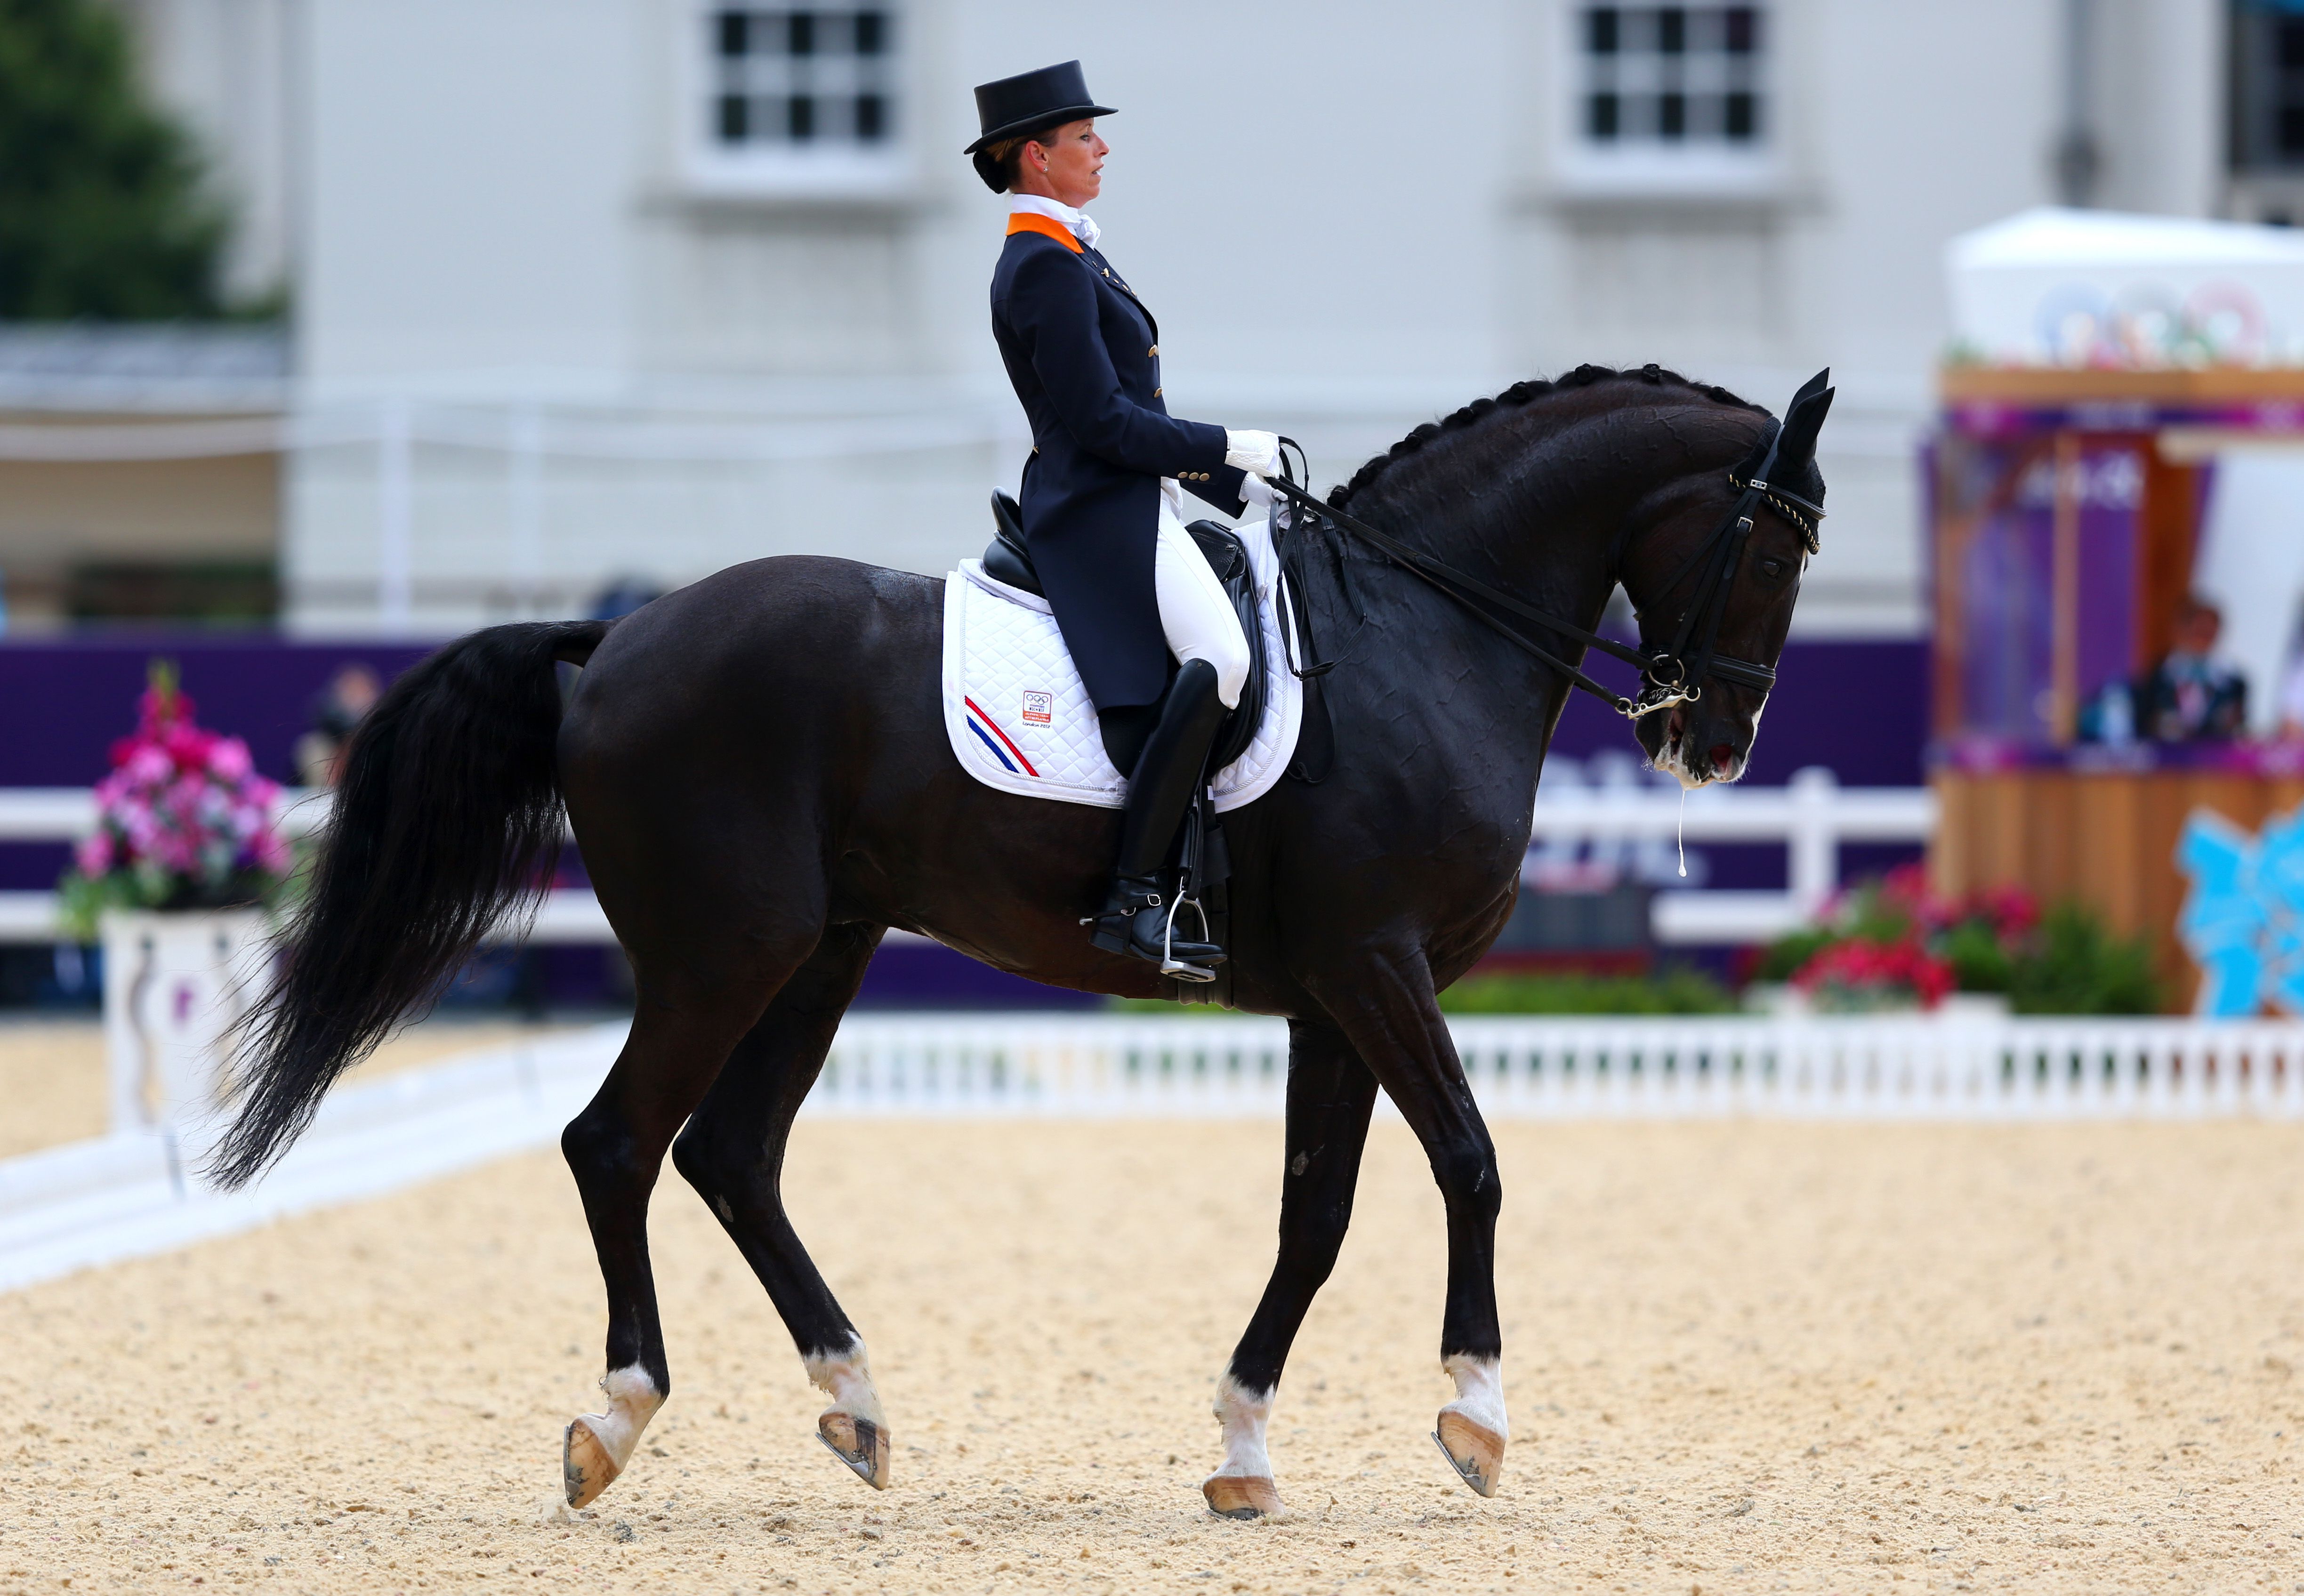 Olympic Equestrian Rules, Judging, and Officials